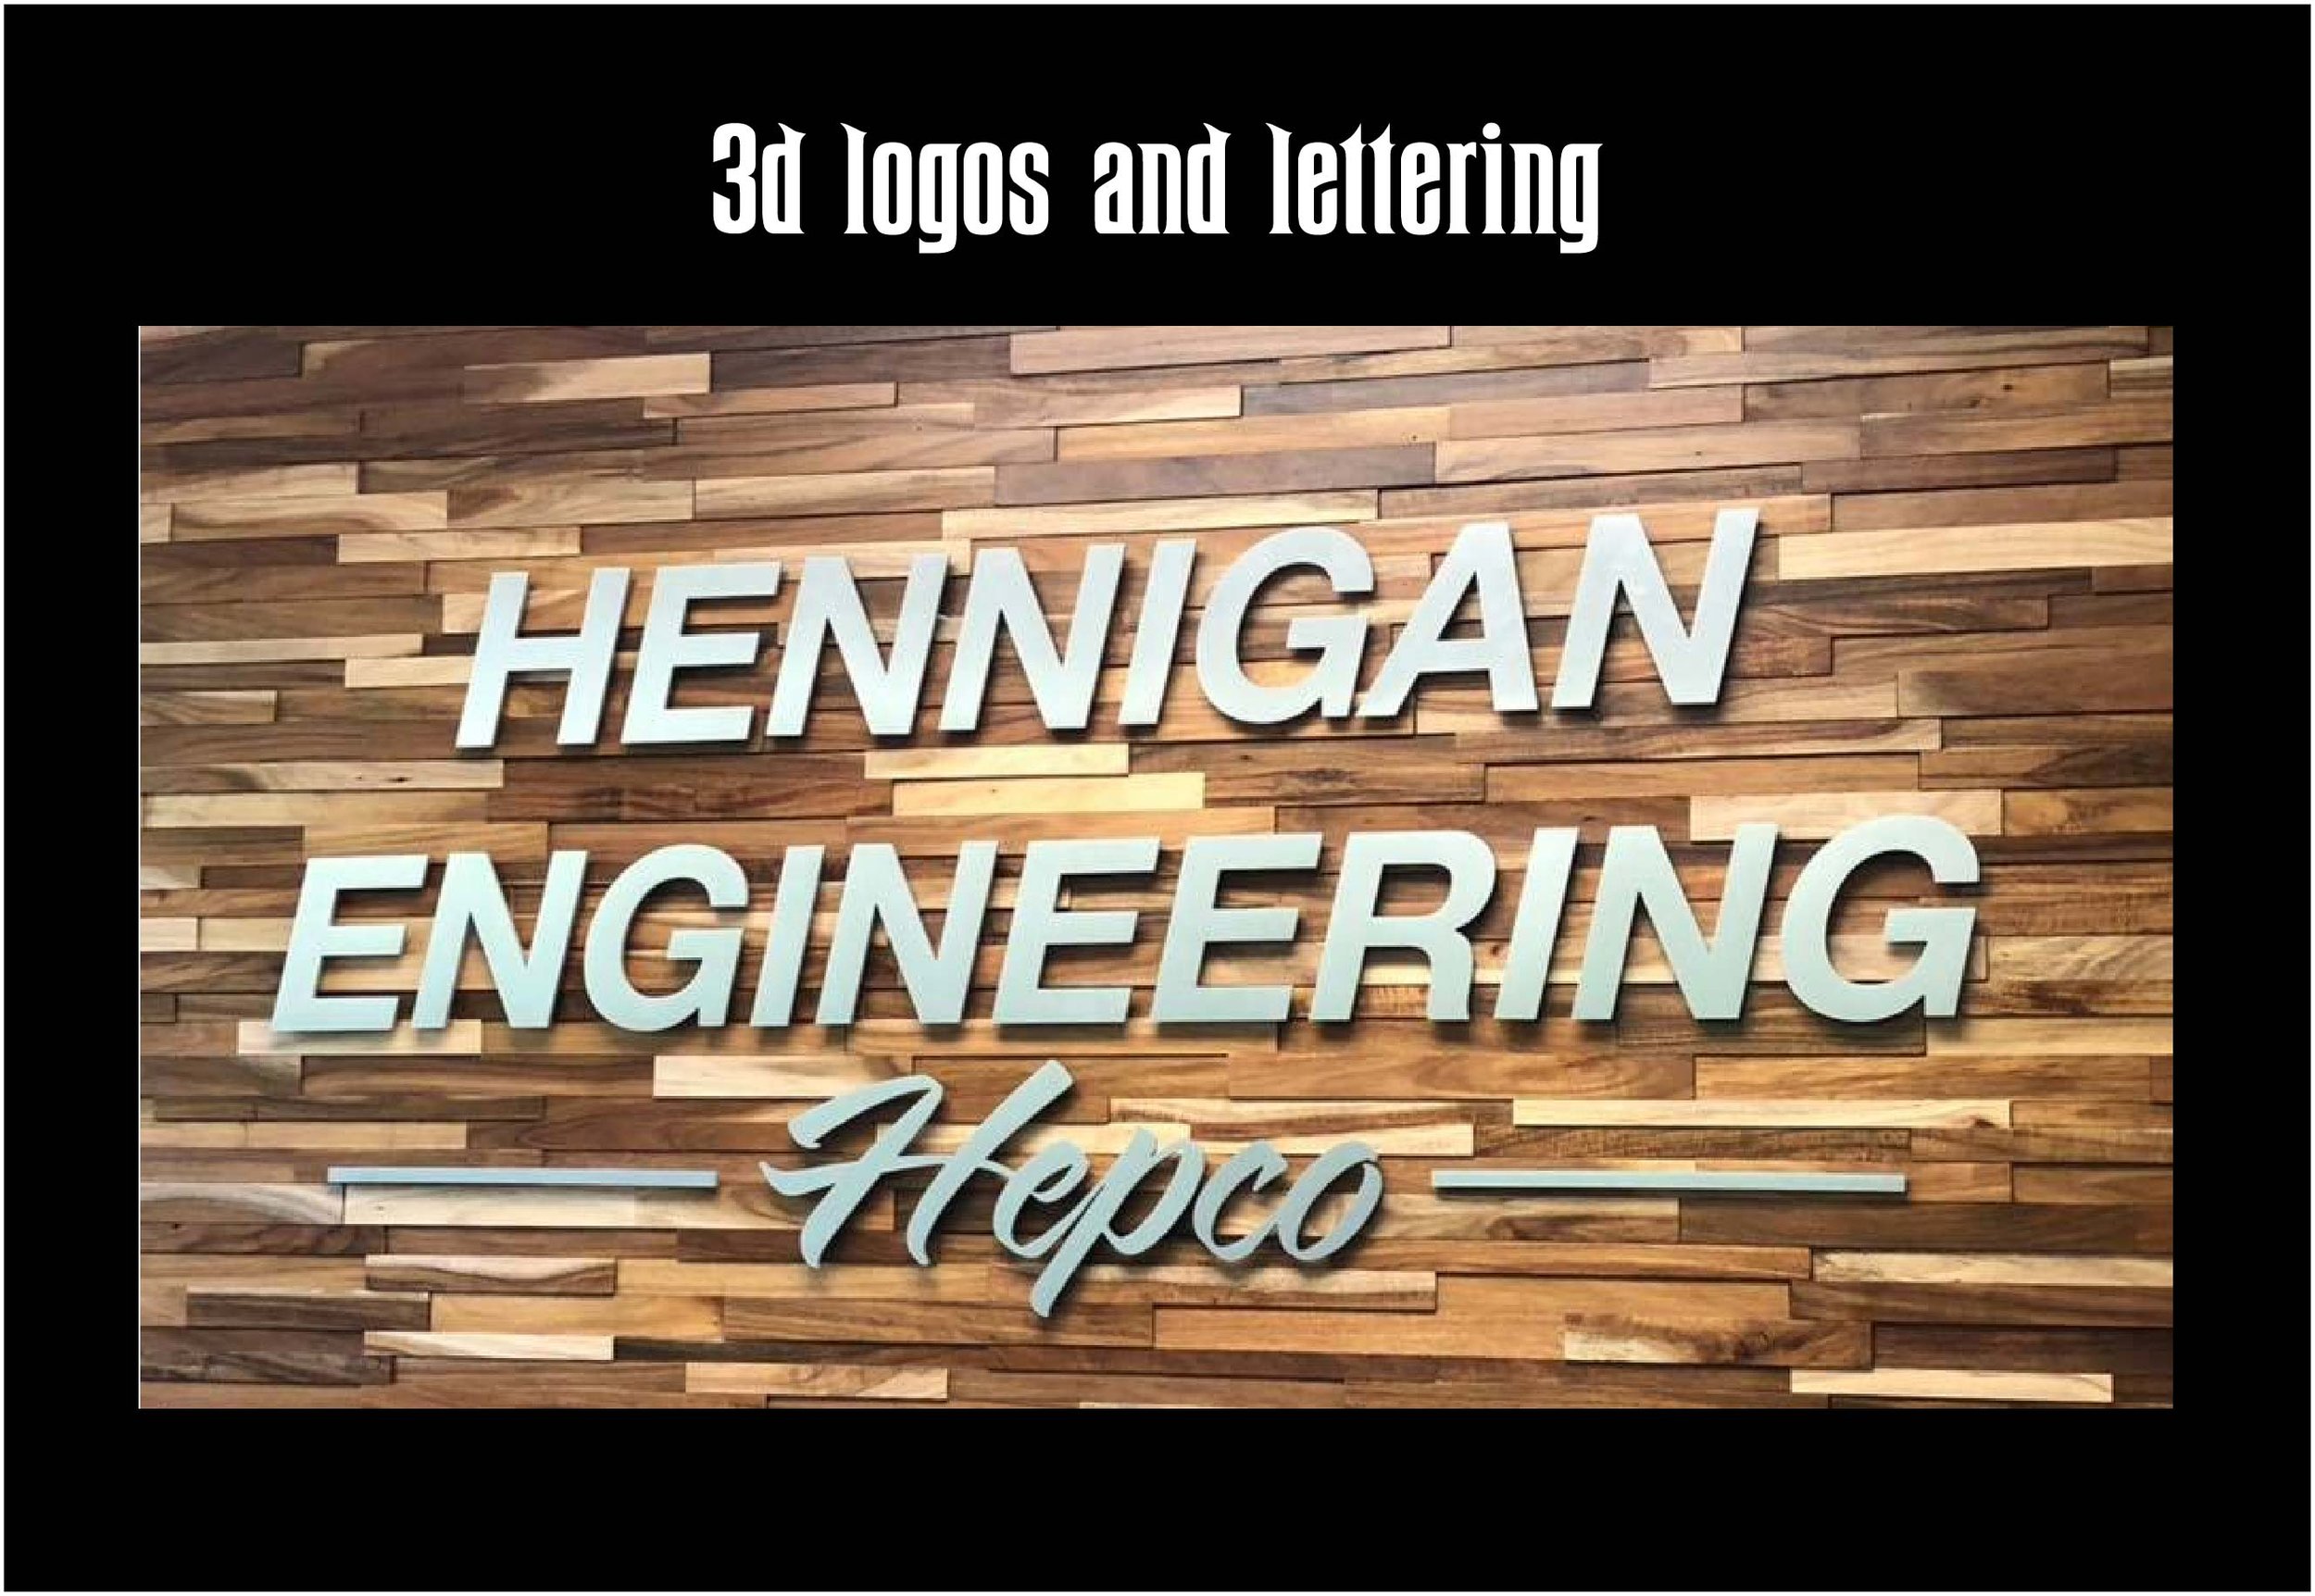 3d logos and lettering.jpg